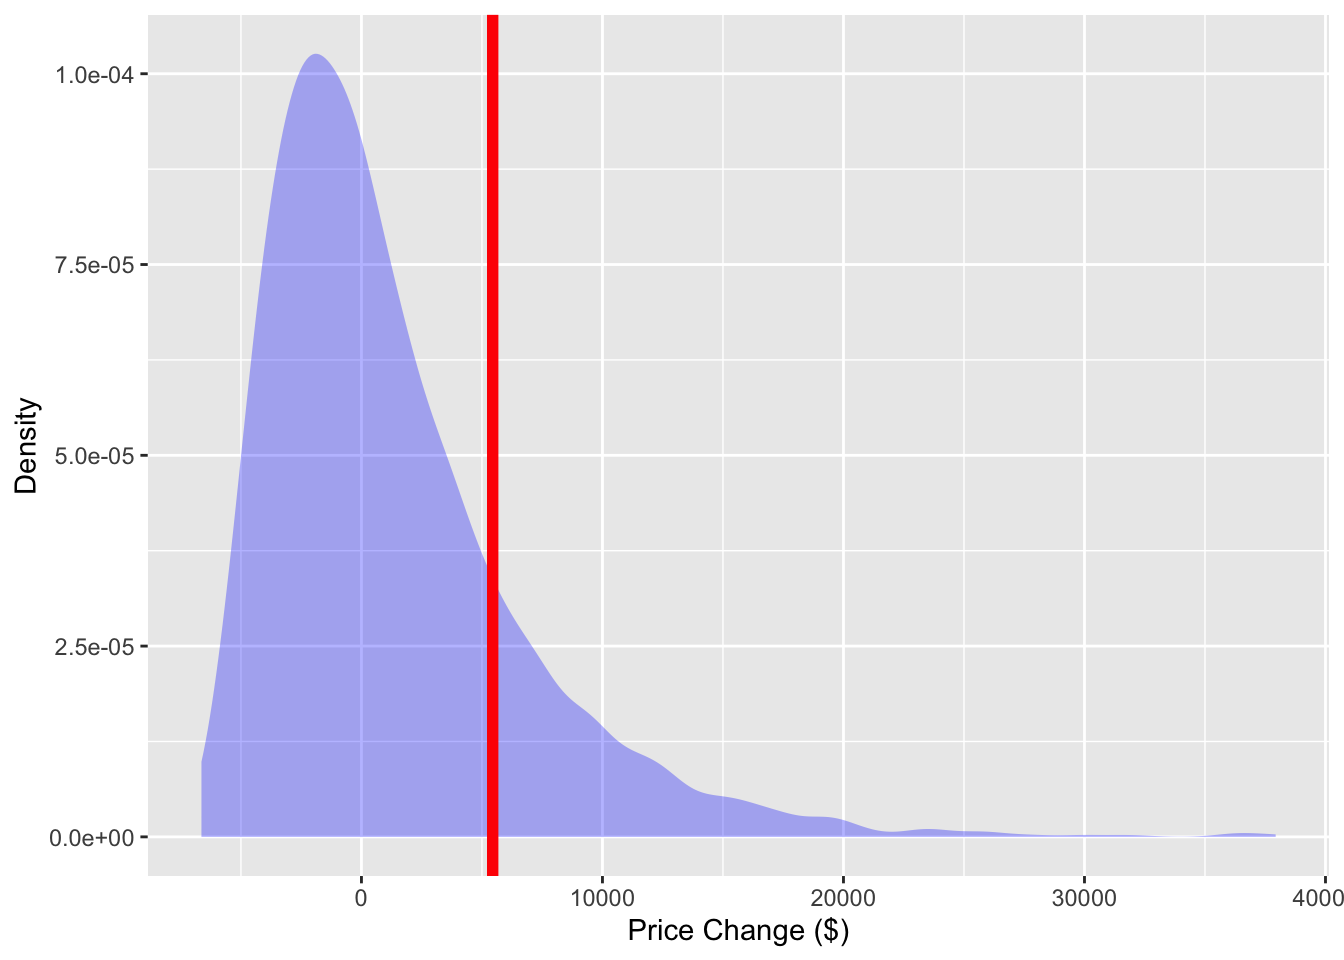 The distribution of start-to-end differences in stock price in the hypothetical world where  that day-to-day changes in price are equally likely to be up or down by the proportions observed in the real world. The value observed in the data, $5446, is marked with a vertical line.